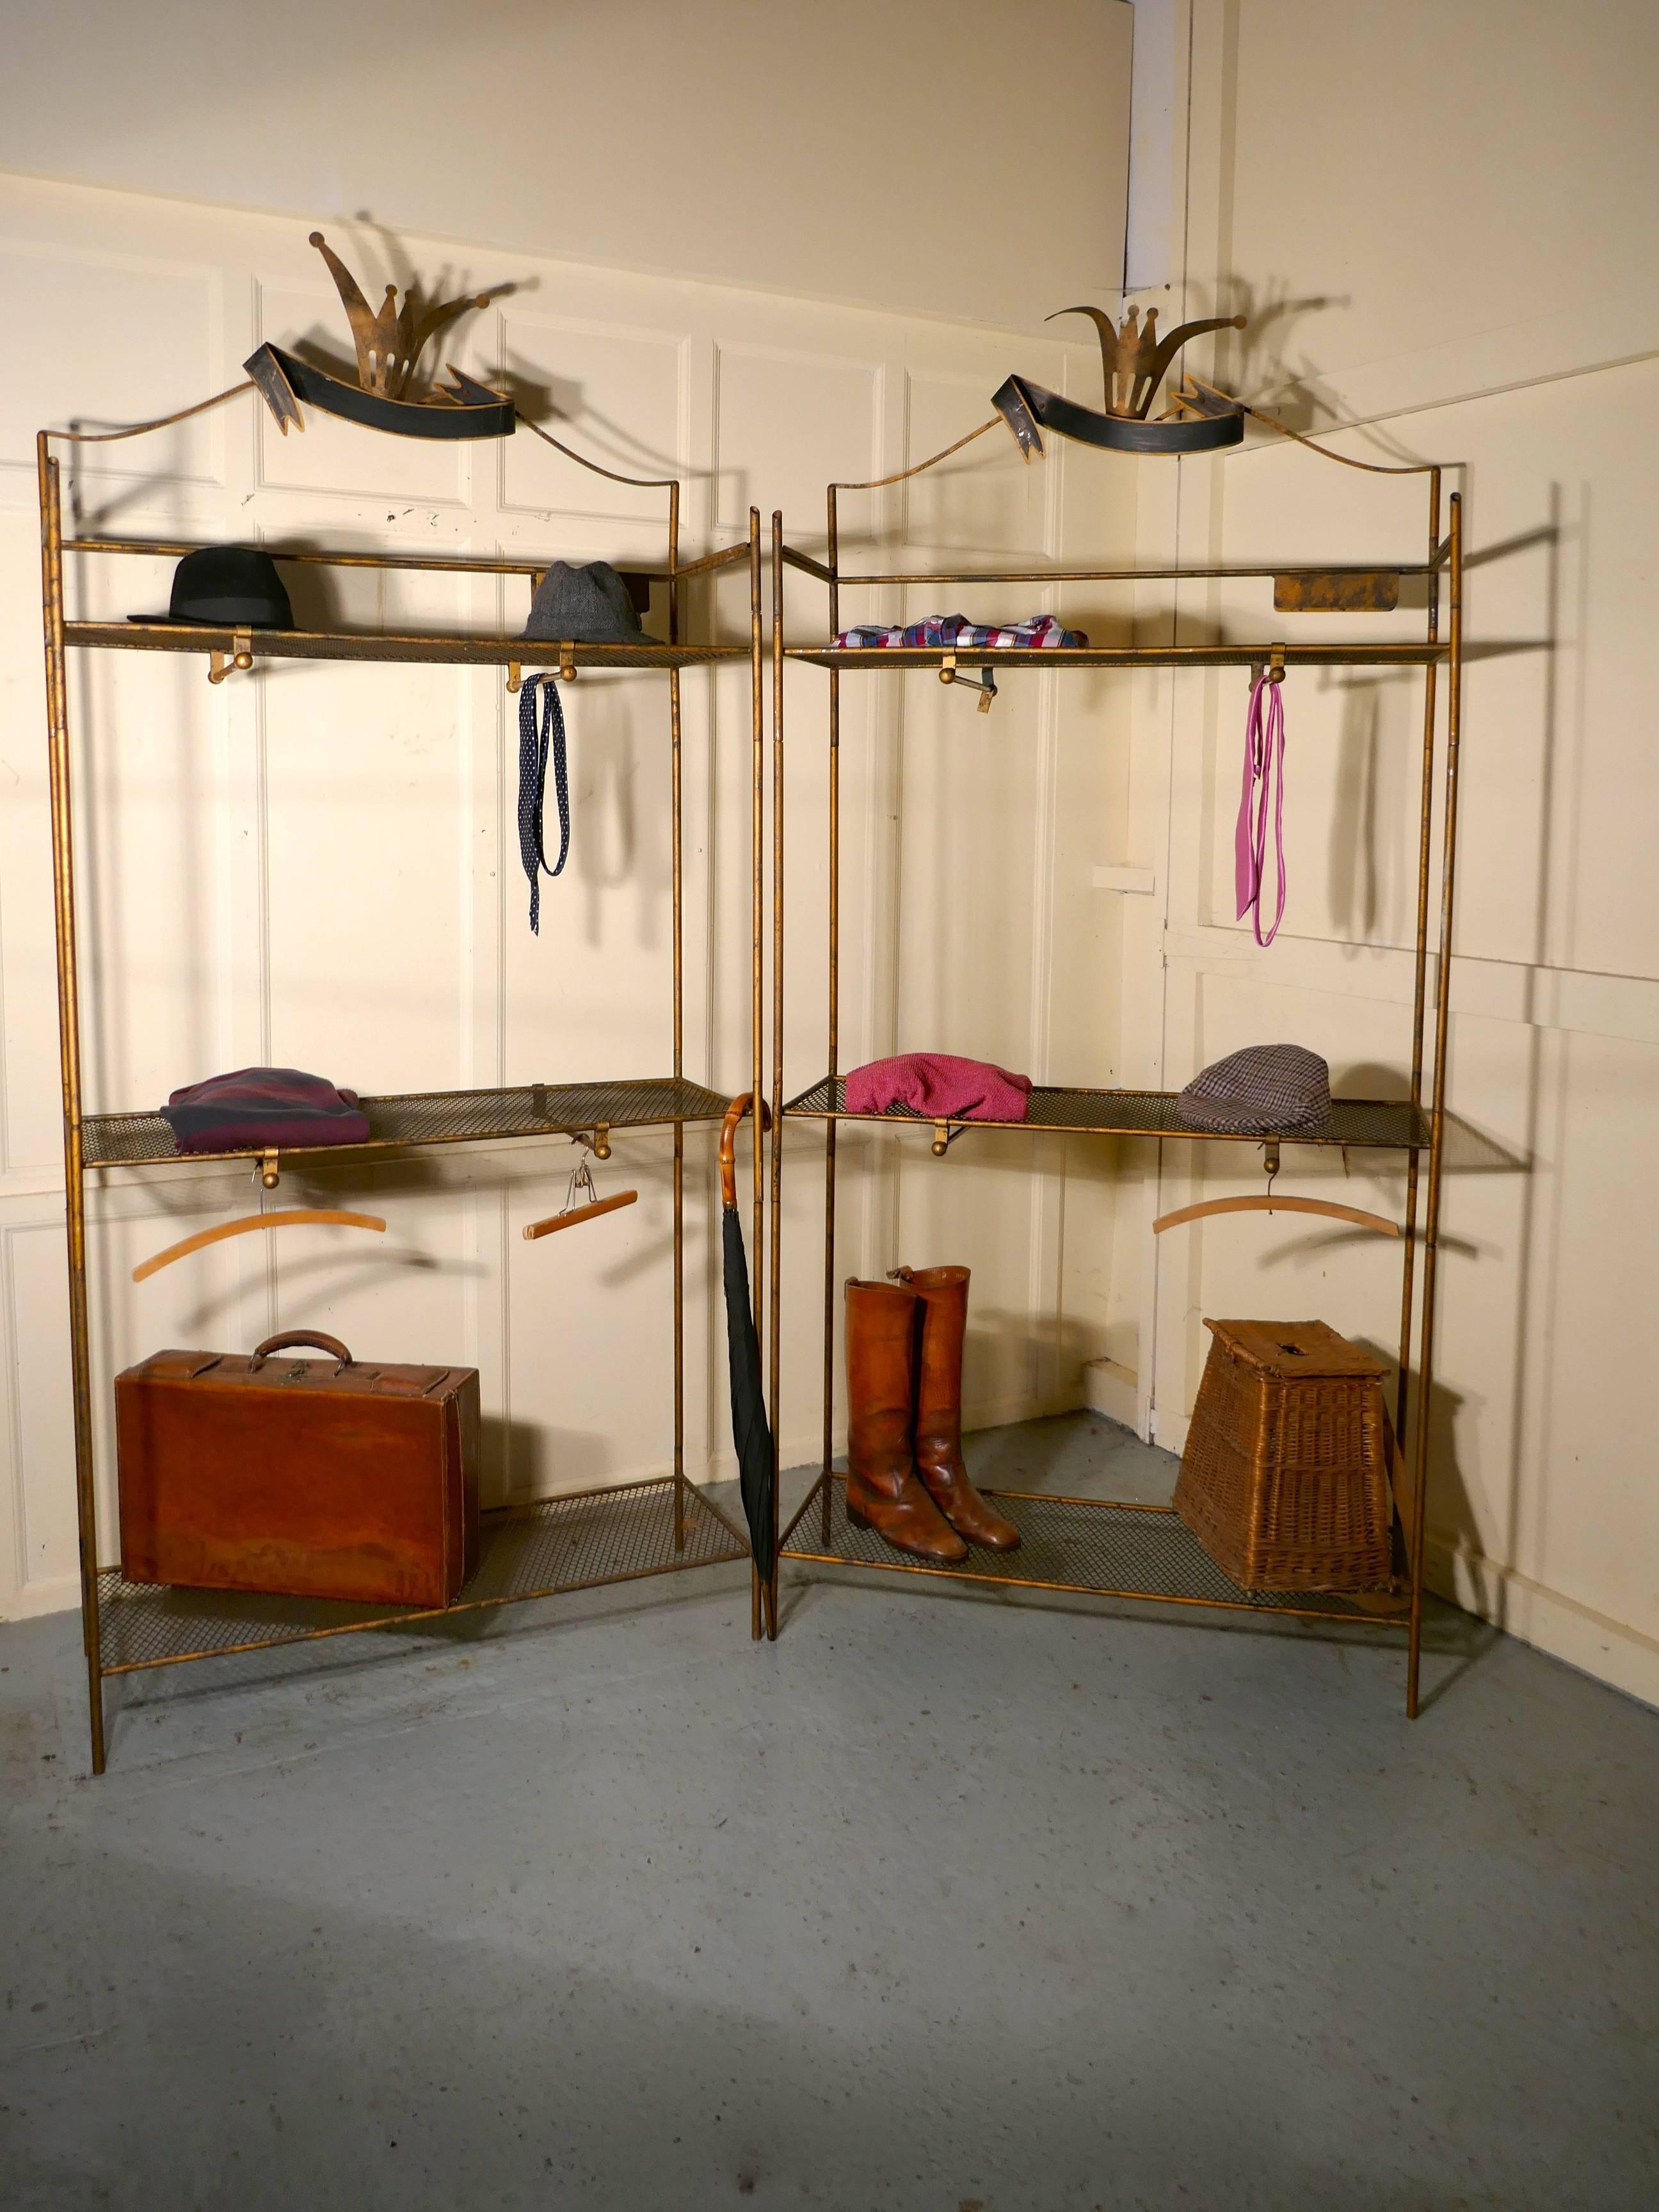 Art Deco outfitter’s department store shop display shelf units

These are very impressive pieces, they are two freestanding units which originate from a stylish department store
The tall racks each have three wire mesh shelves, the two higher